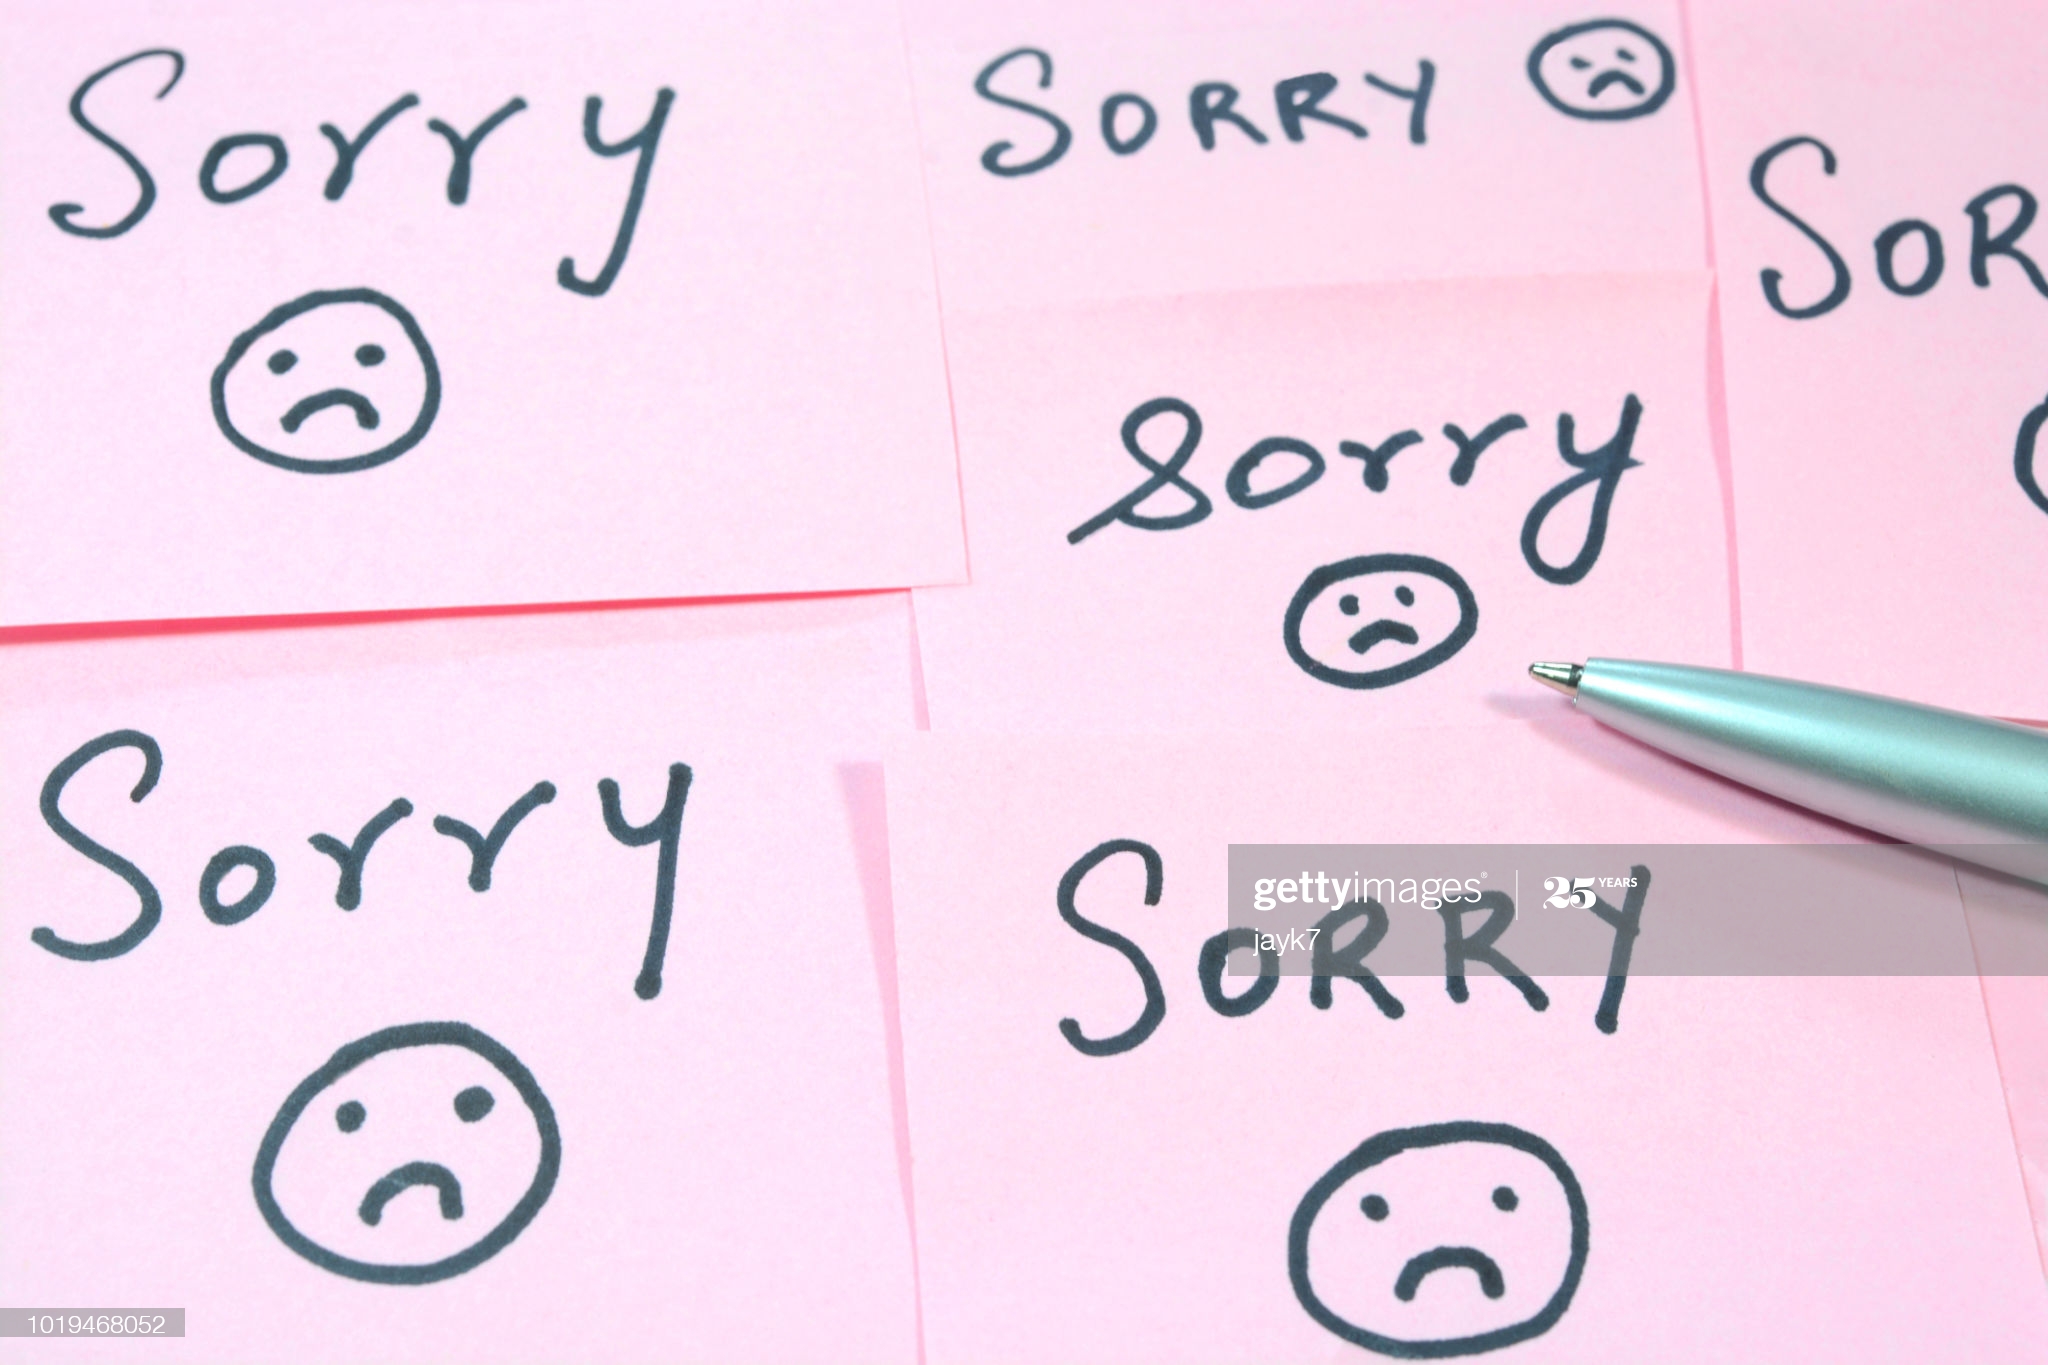 Sorry word written on adhesive sticky notes.